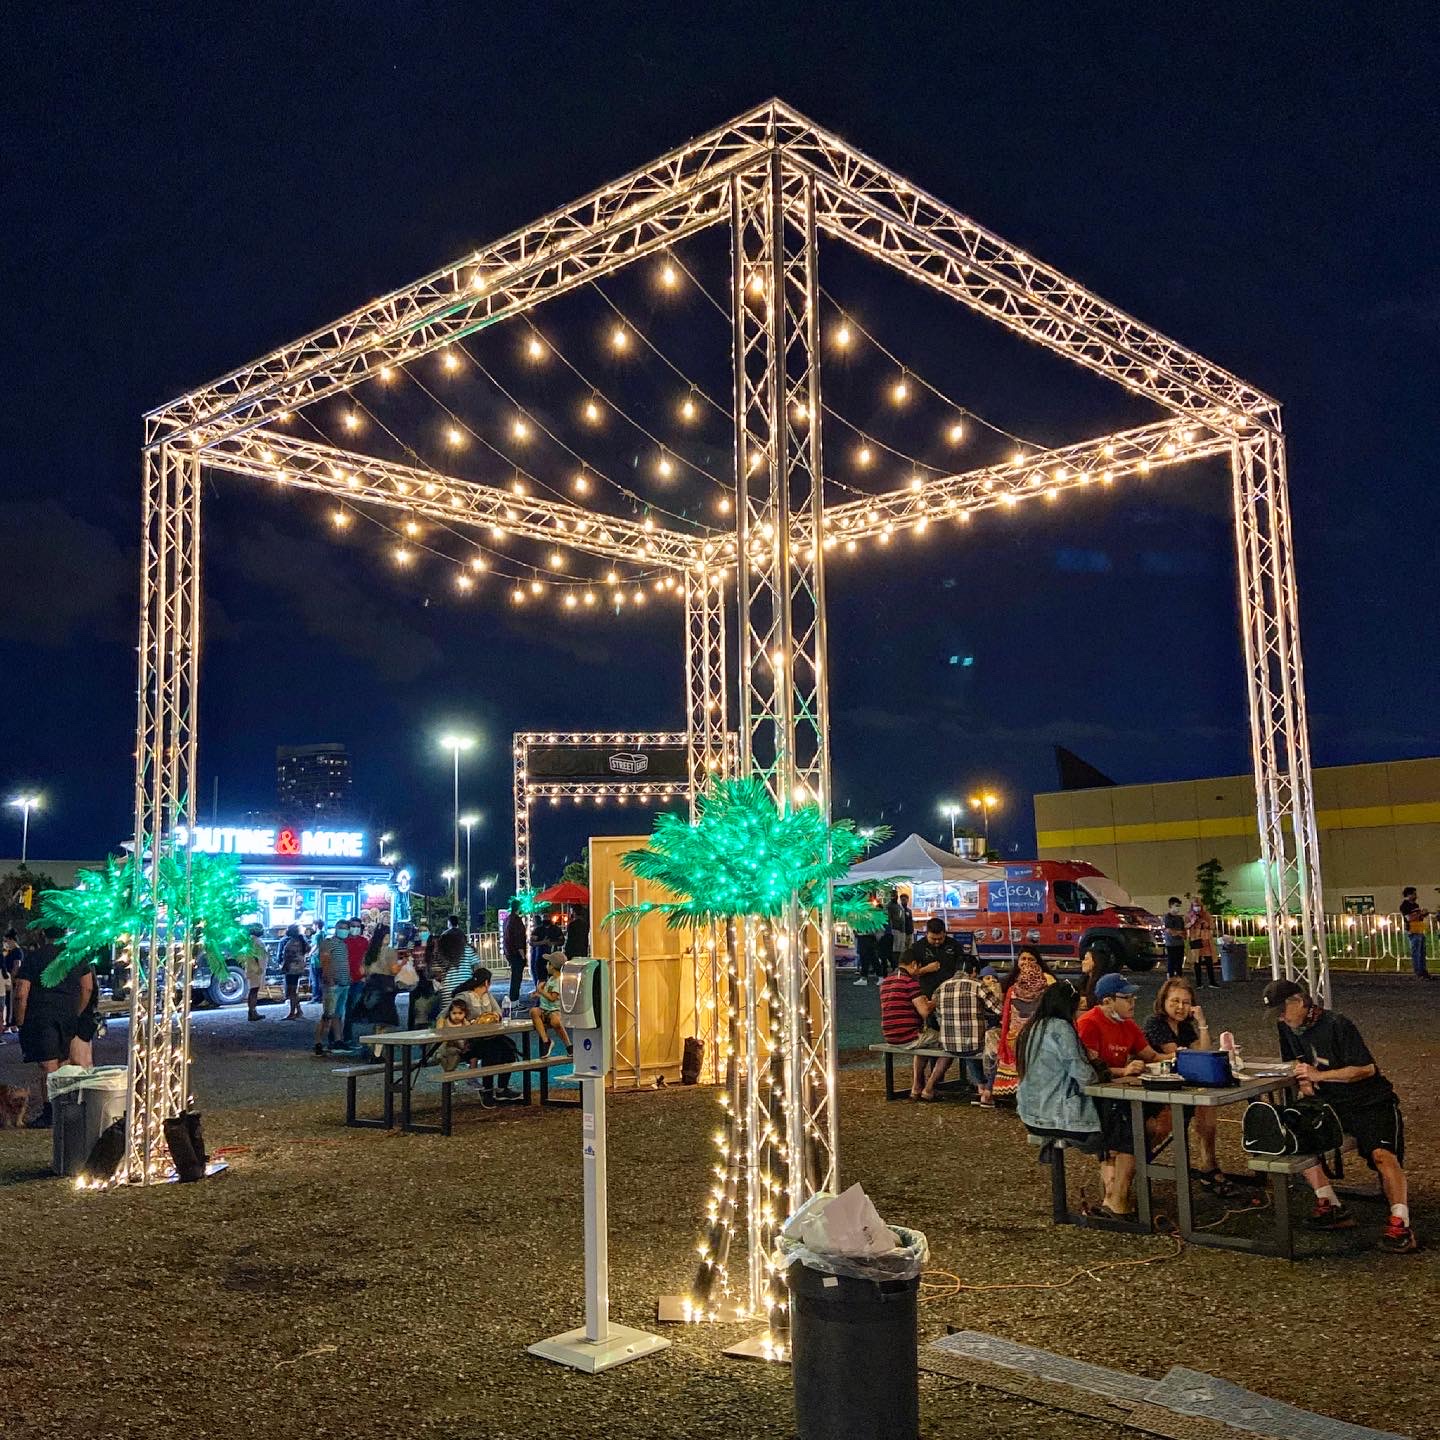 Gazebo covered in lights at a night festival